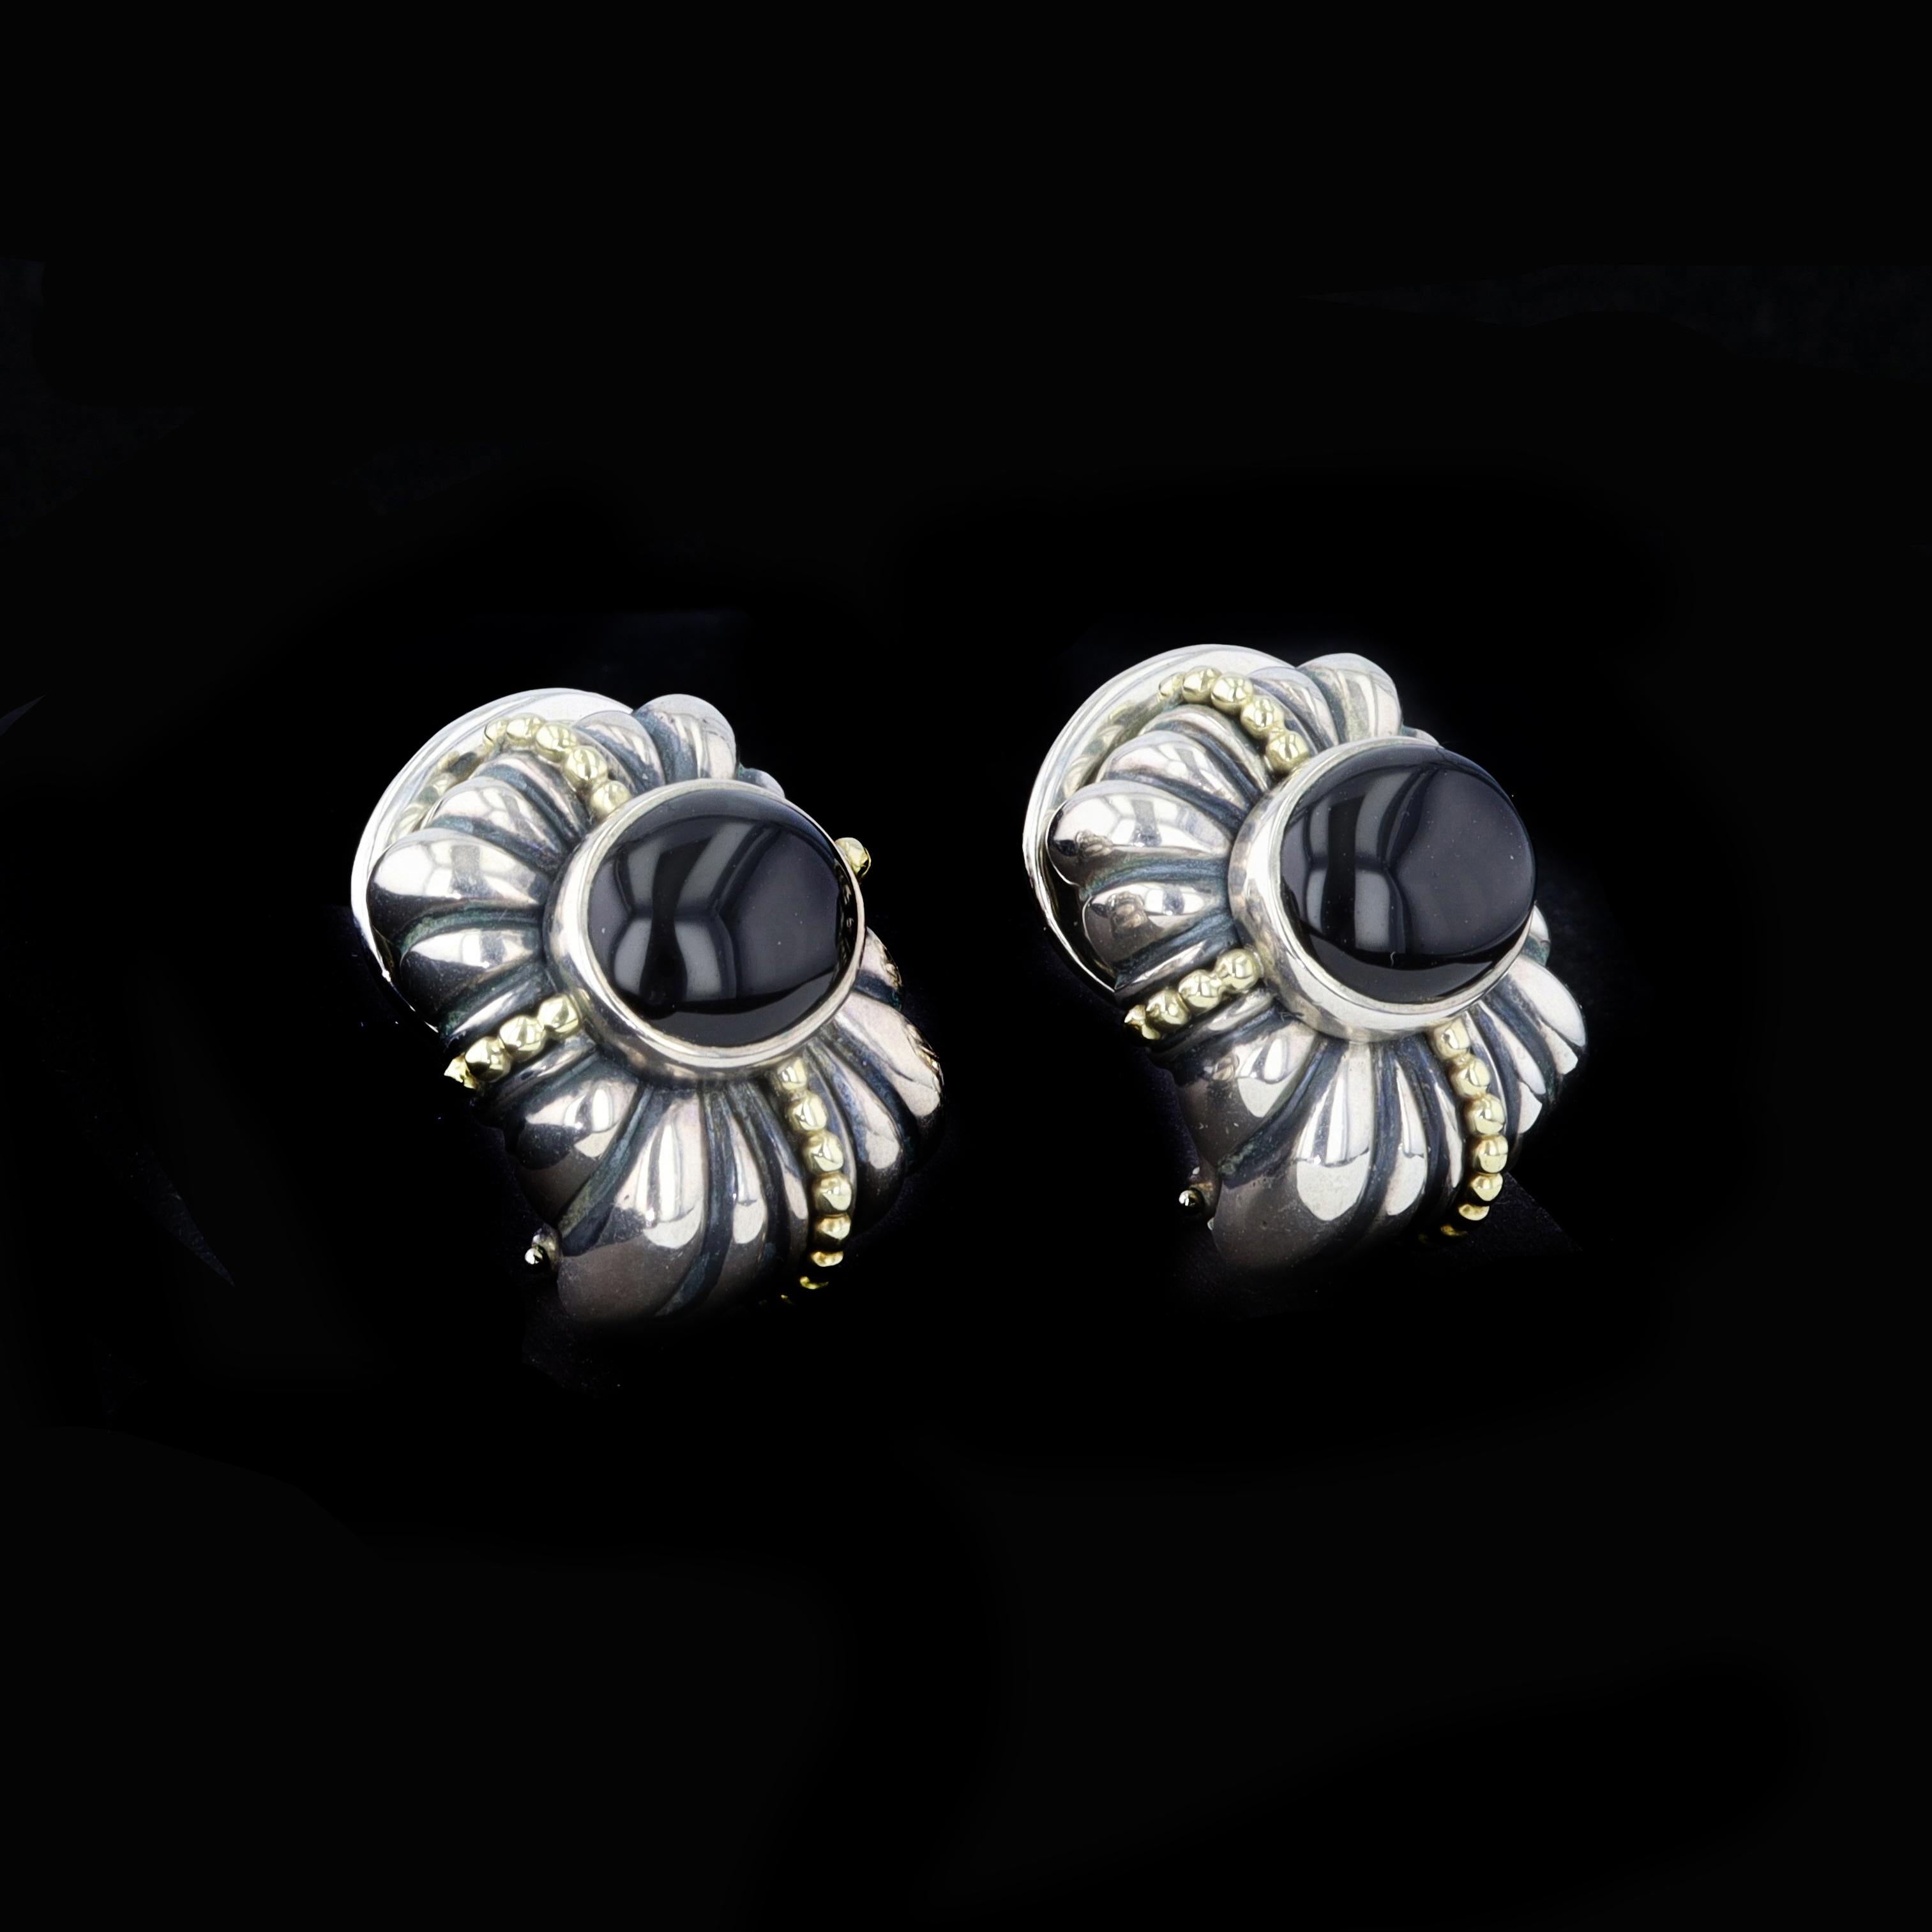 Unique and retro sterling silver onyx earrings feature beautifully detailed yellow gold beading. These on the ear style earrings have a lever back closure.

